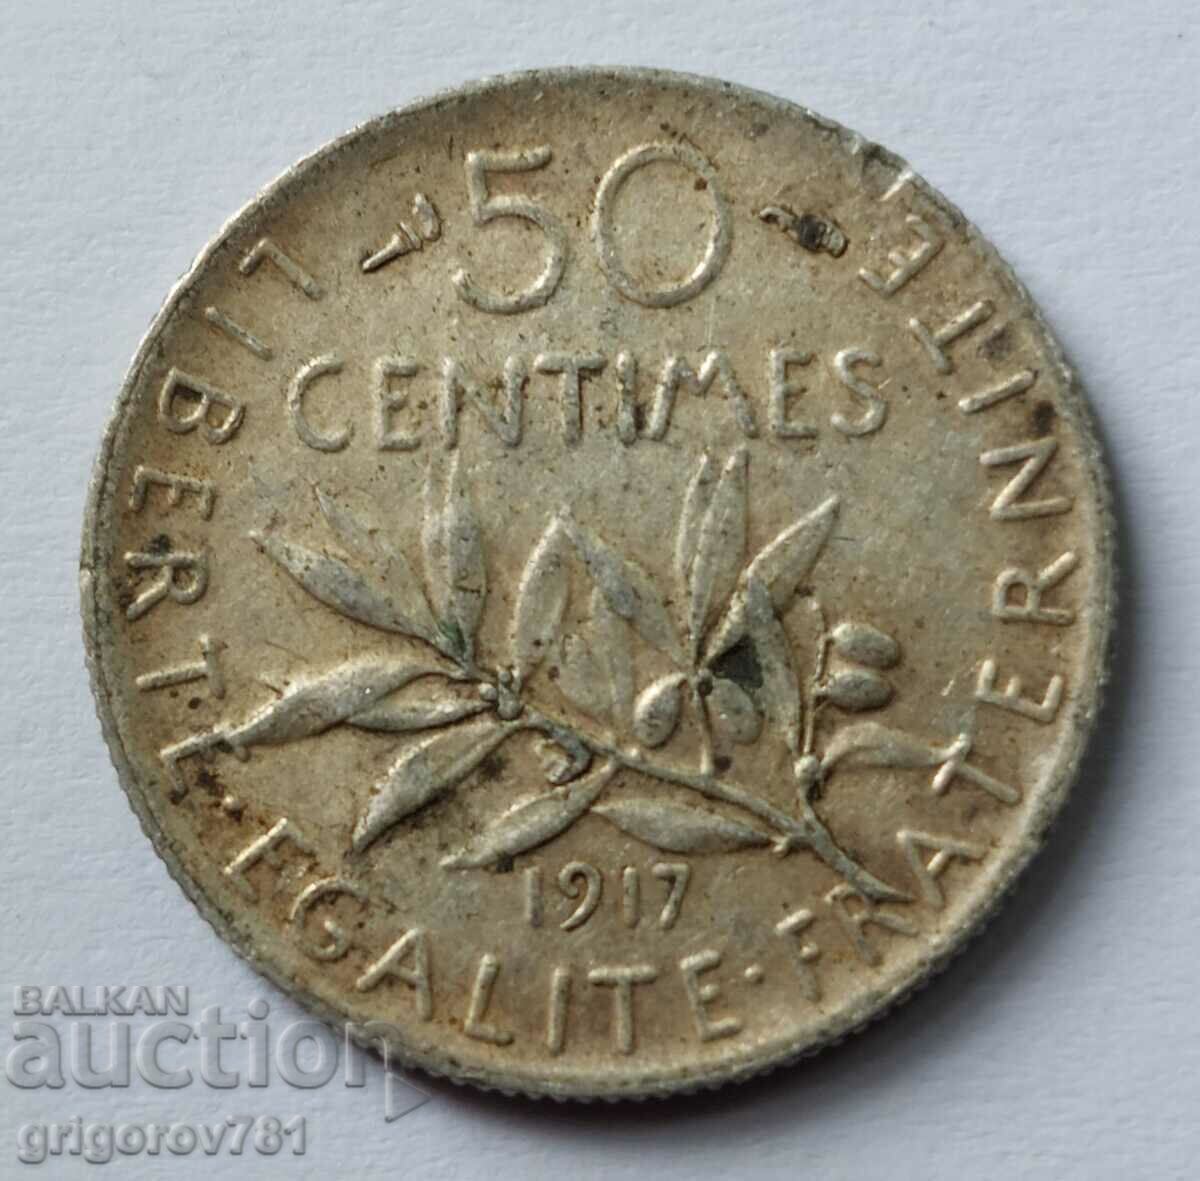 50 centimes silver France 1917 - silver coin №16